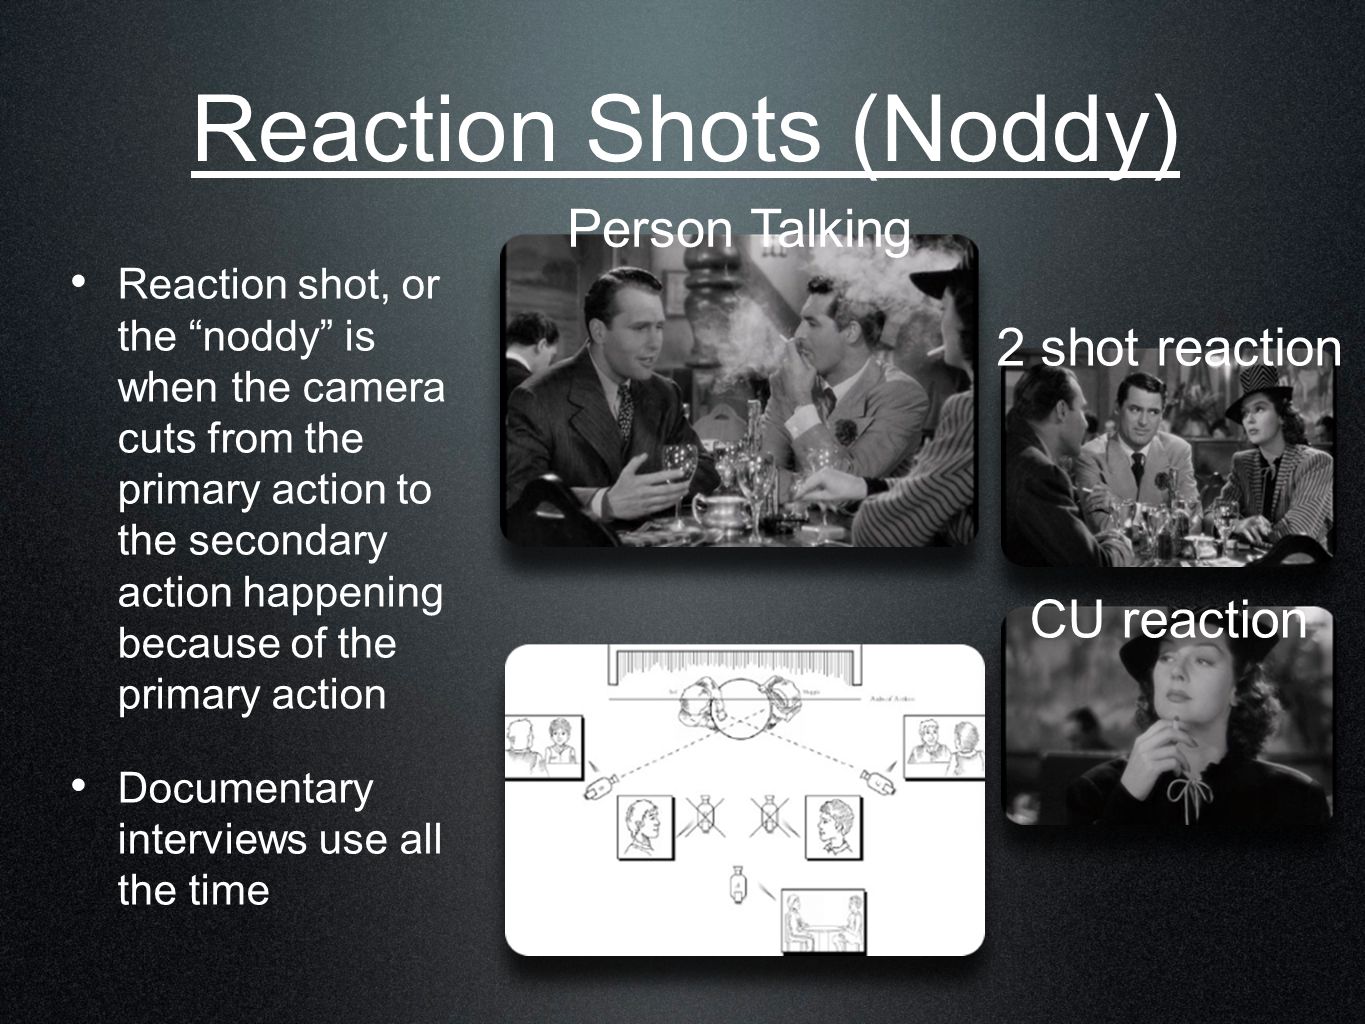 Reaction Shots (Noddy) Reaction shot, or the noddy is when the camera cuts from the primary action to the secondary action happening because of the primary action Documentary interviews use all the time Person Talking 2 shot reaction CU reaction